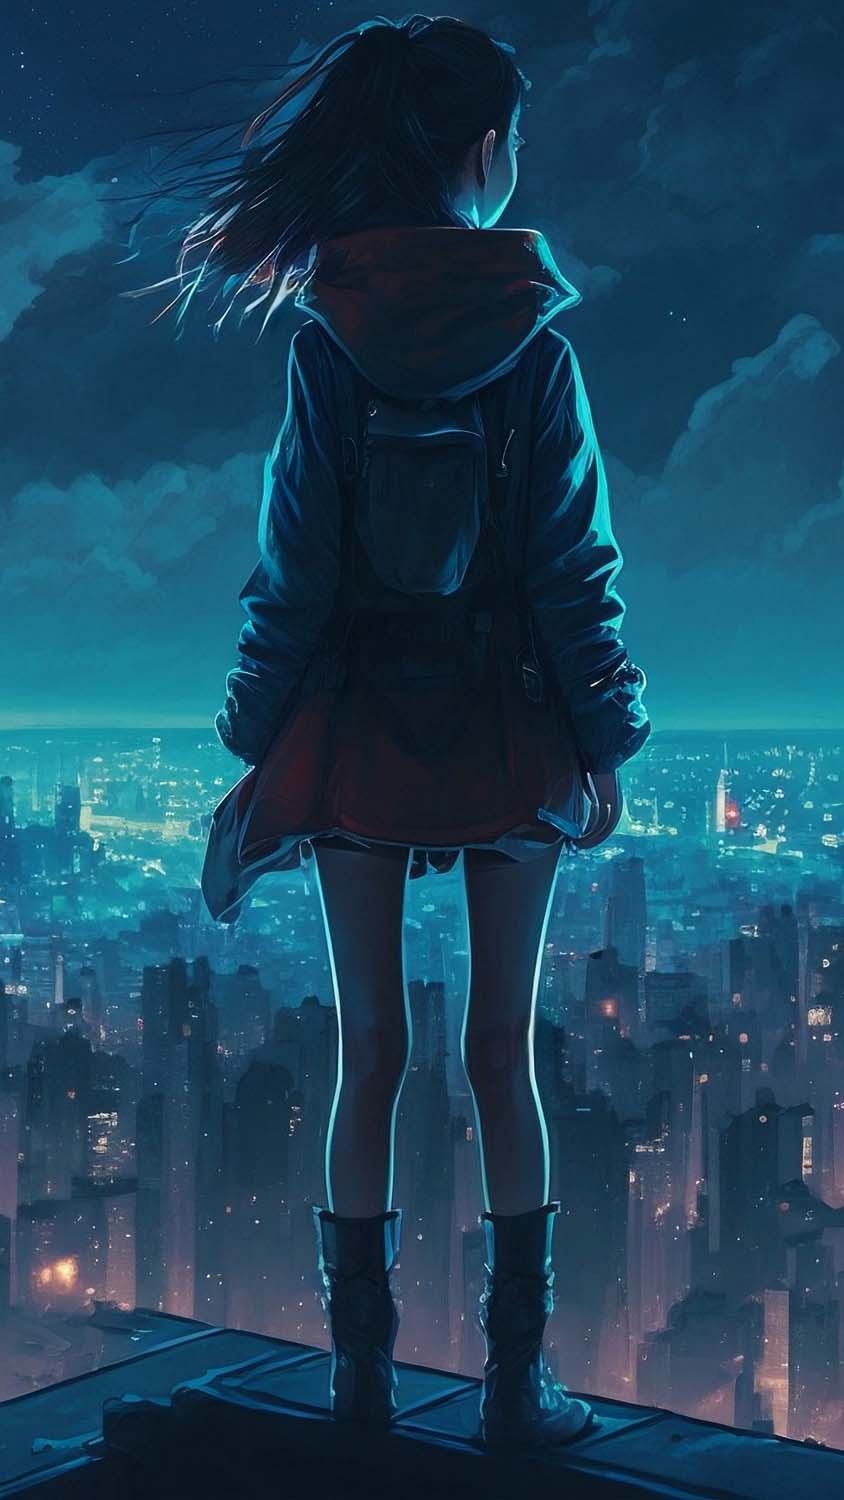 The Girl Alone iPhone Wallpaper HD